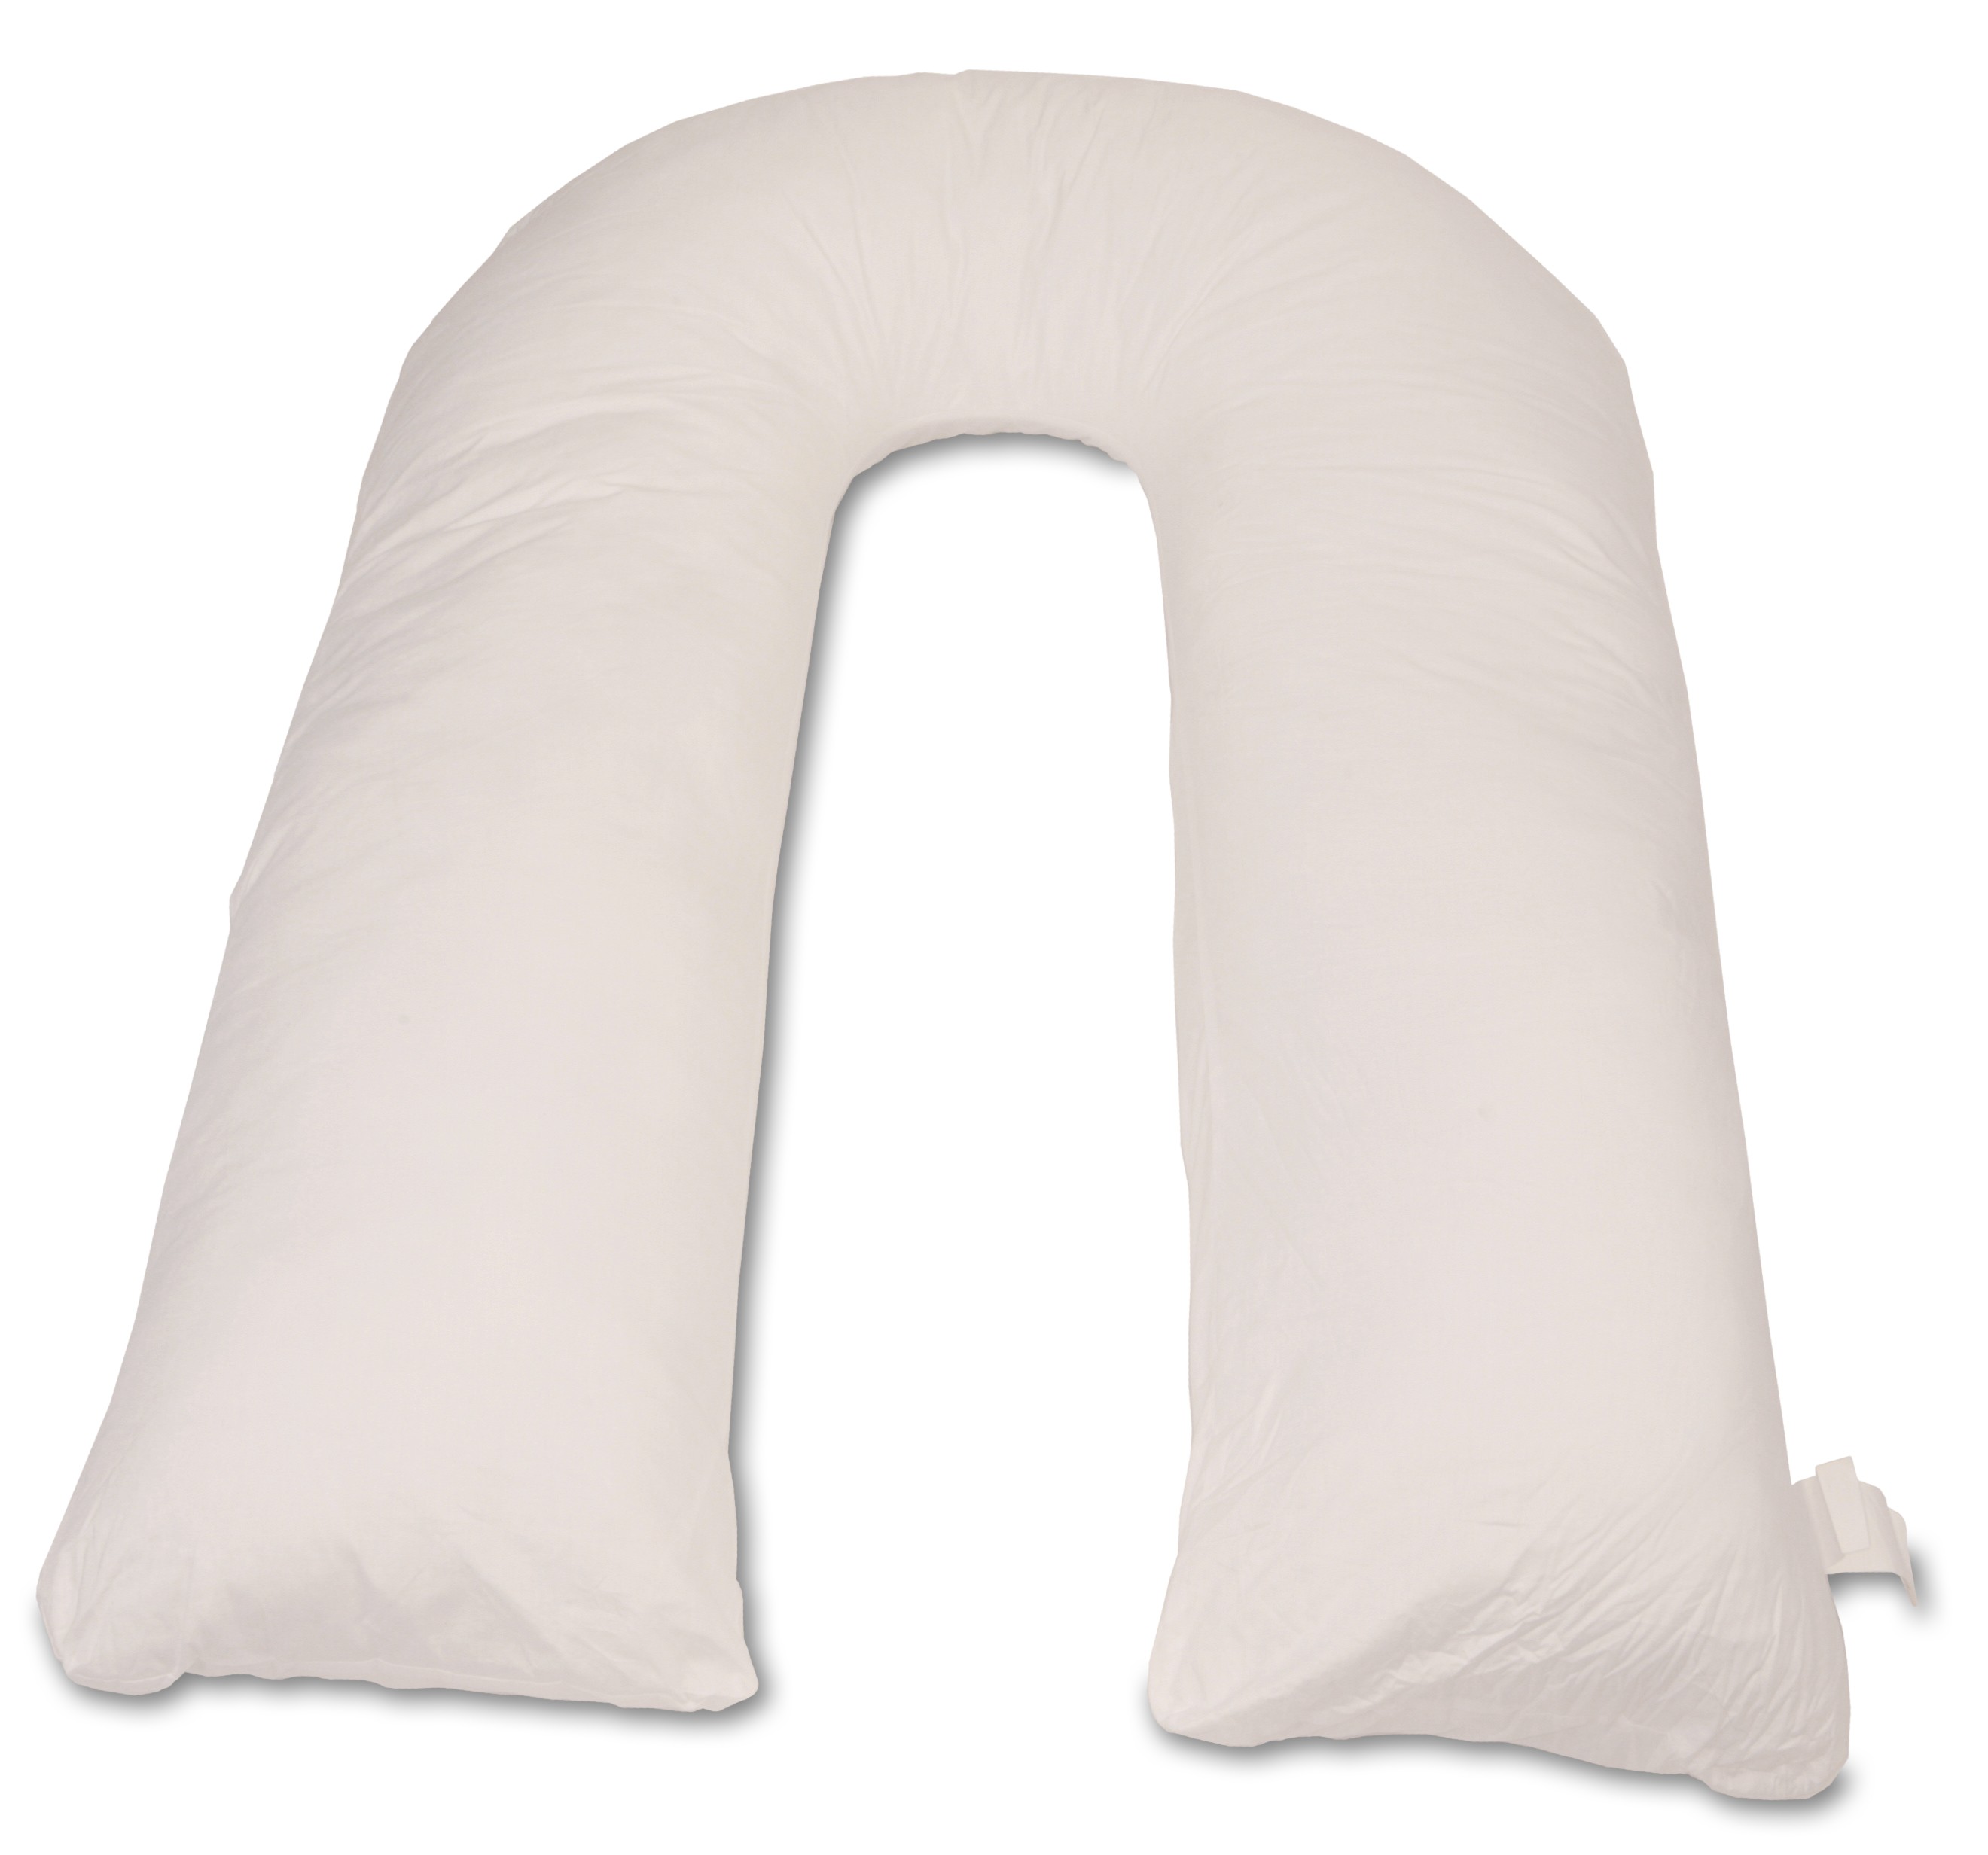 comfort u total body support pillow review